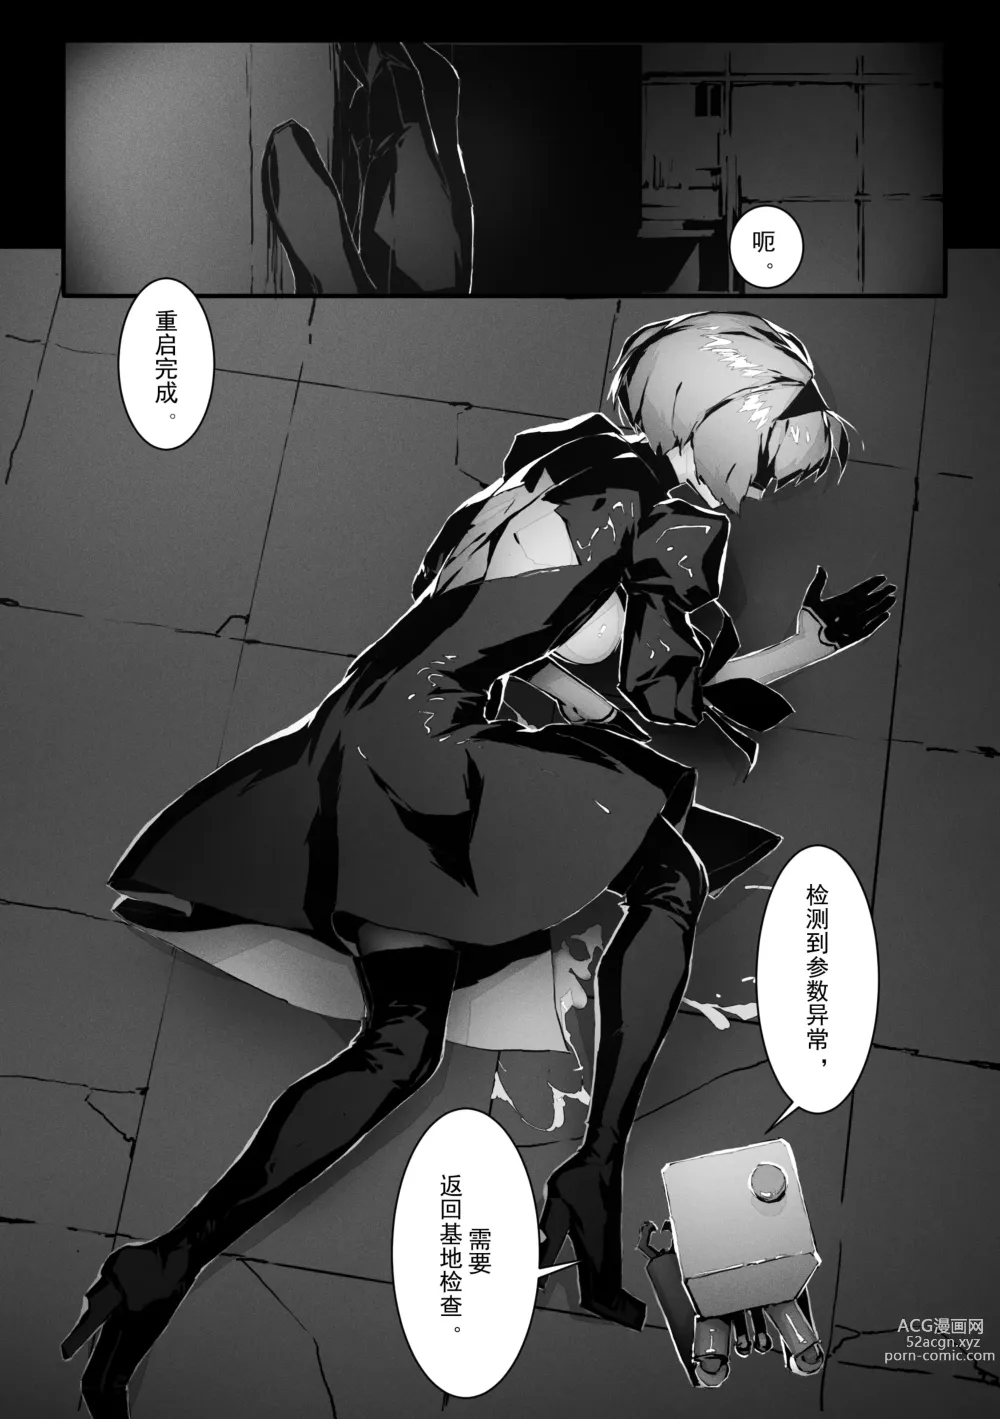 Page 24 of doujinshi 2B In Trouble Part 1-6